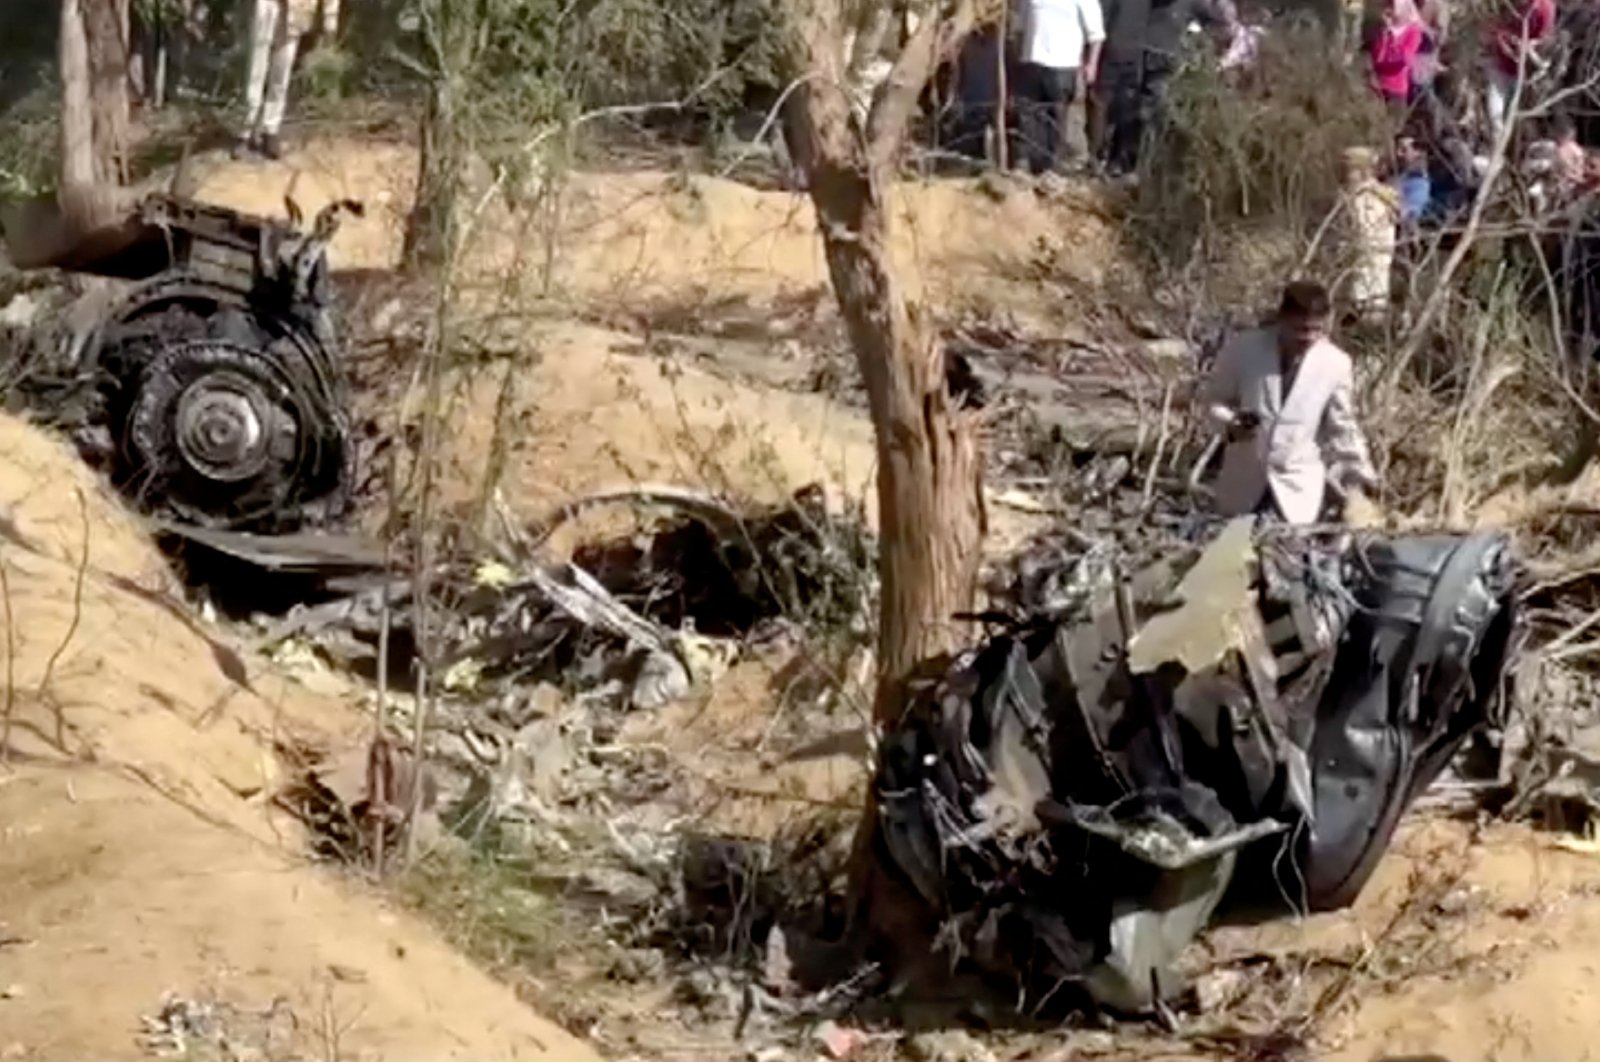 A general view of the debris of a crashed aircraft in Bharatpur, Rajasthan, India, Jan. 28, 2023. (Reuters Photo)